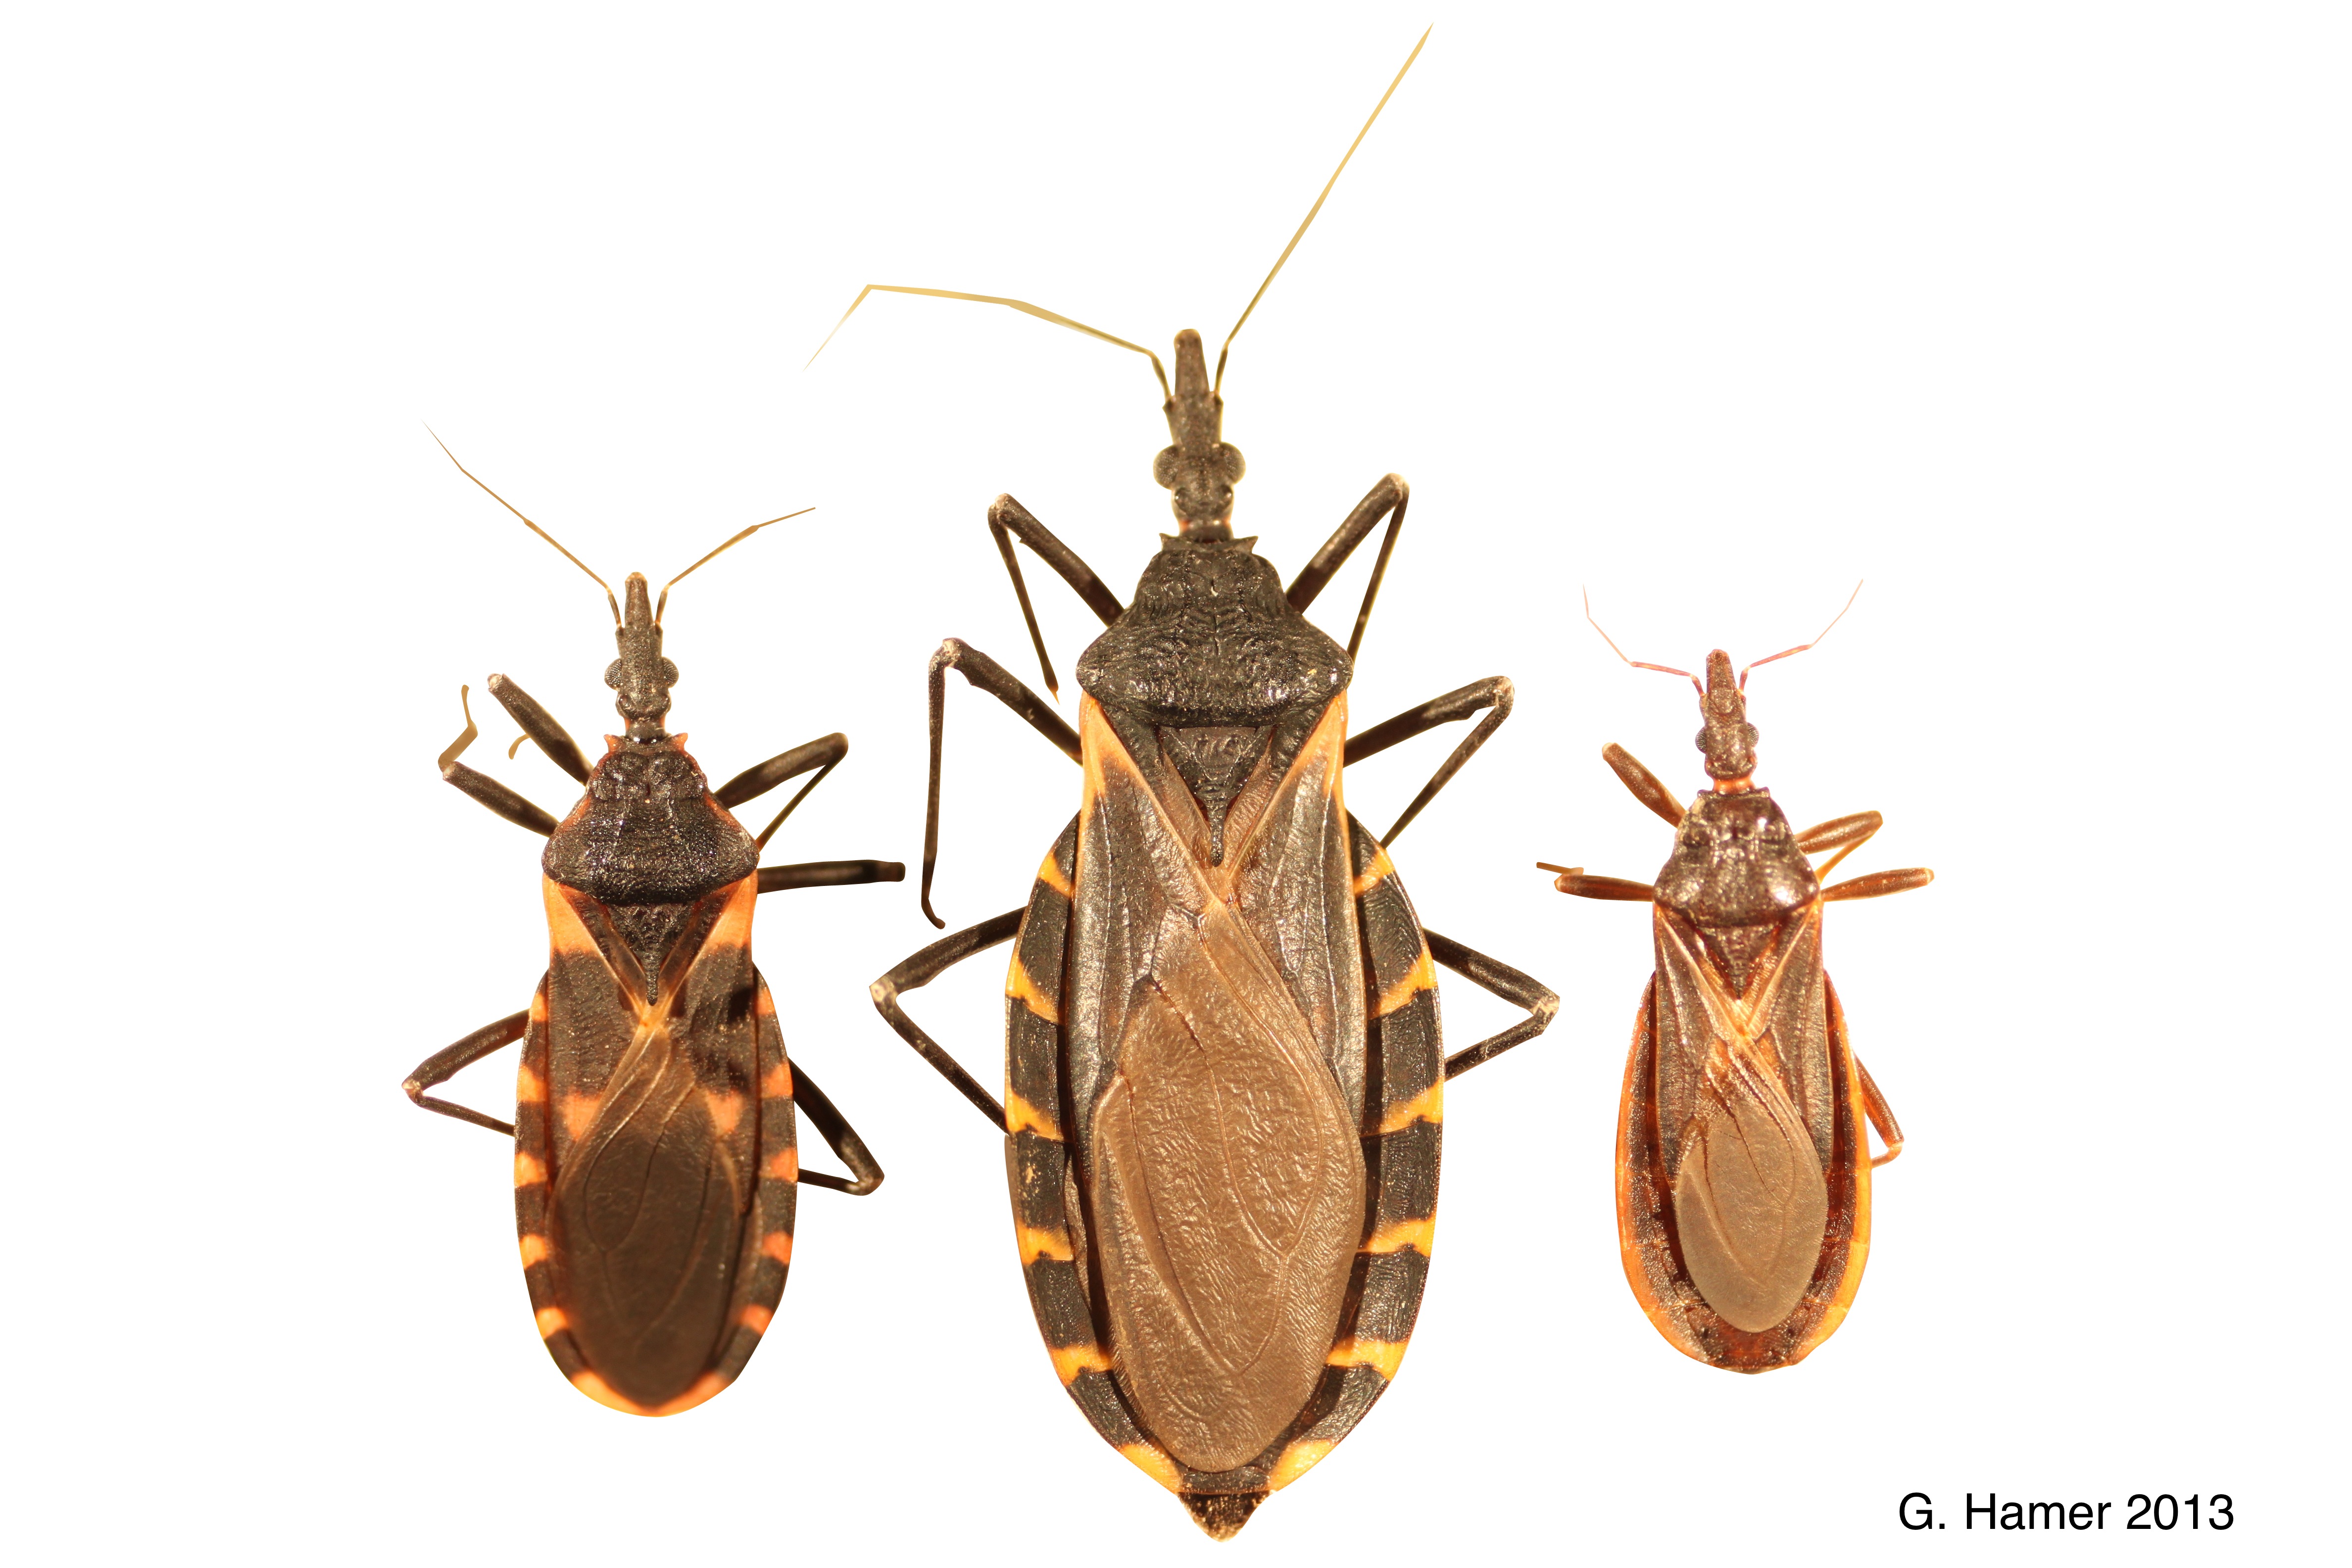 Bolivia: Of every 10 pregnant women, 2 test positive for Chagas in Tarija